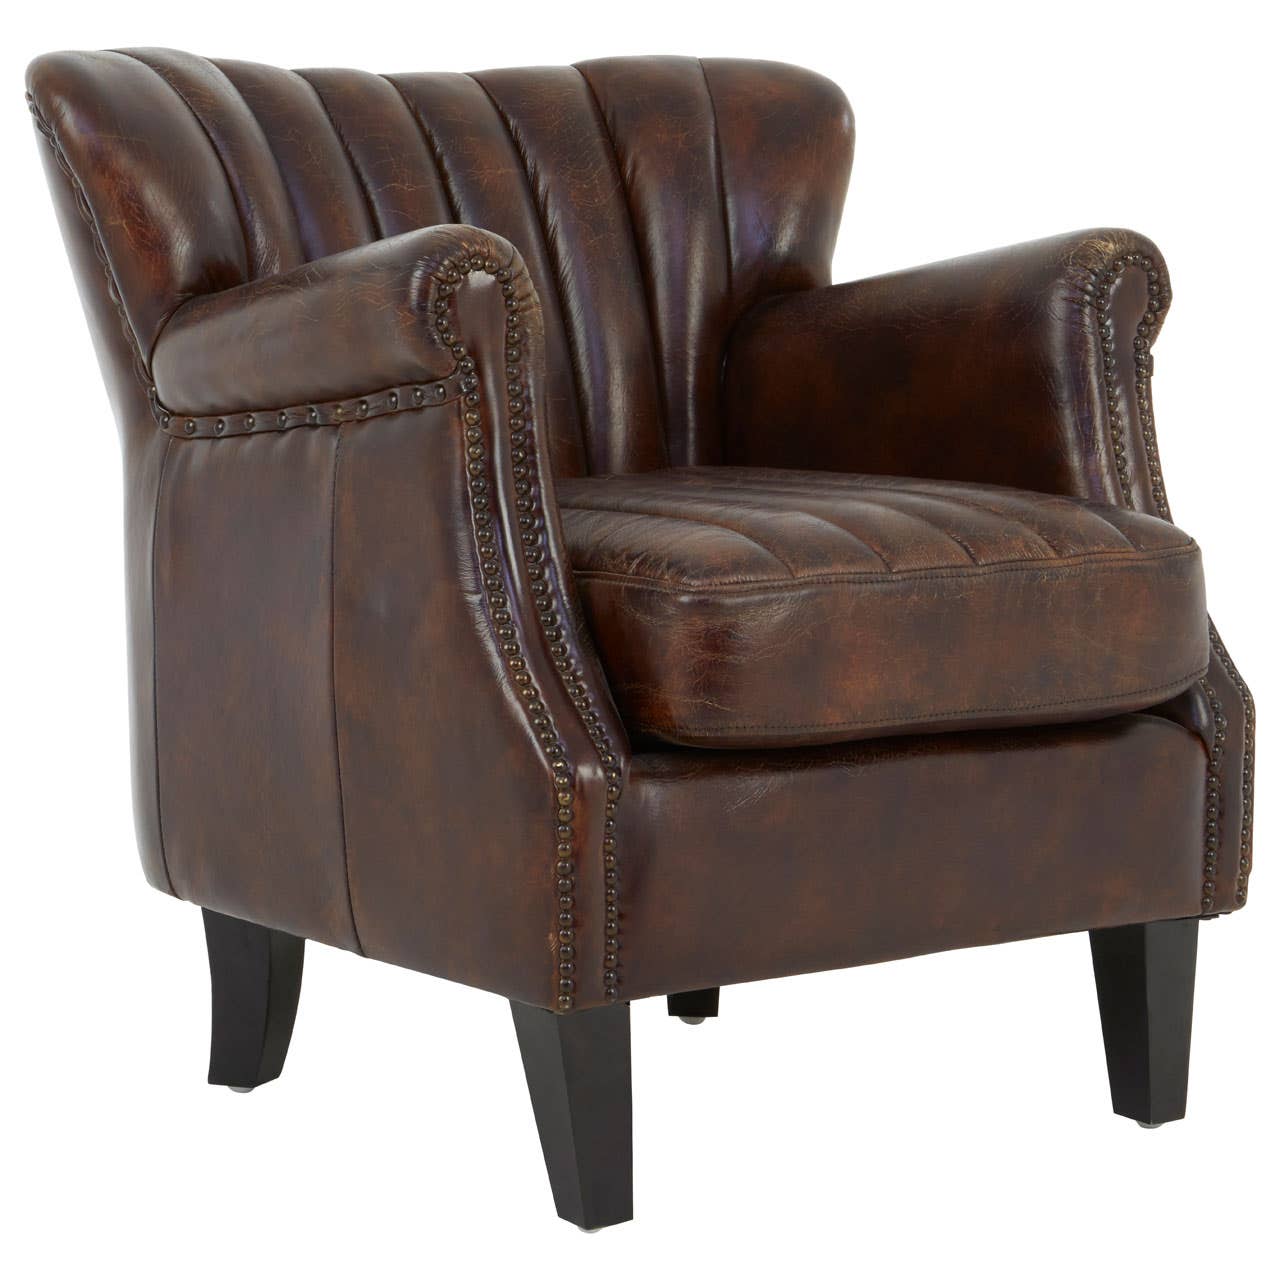 Grosvenor Wingback Chocolate Brown Classic Aged Leather Occasional Armchair With Walnut Wood